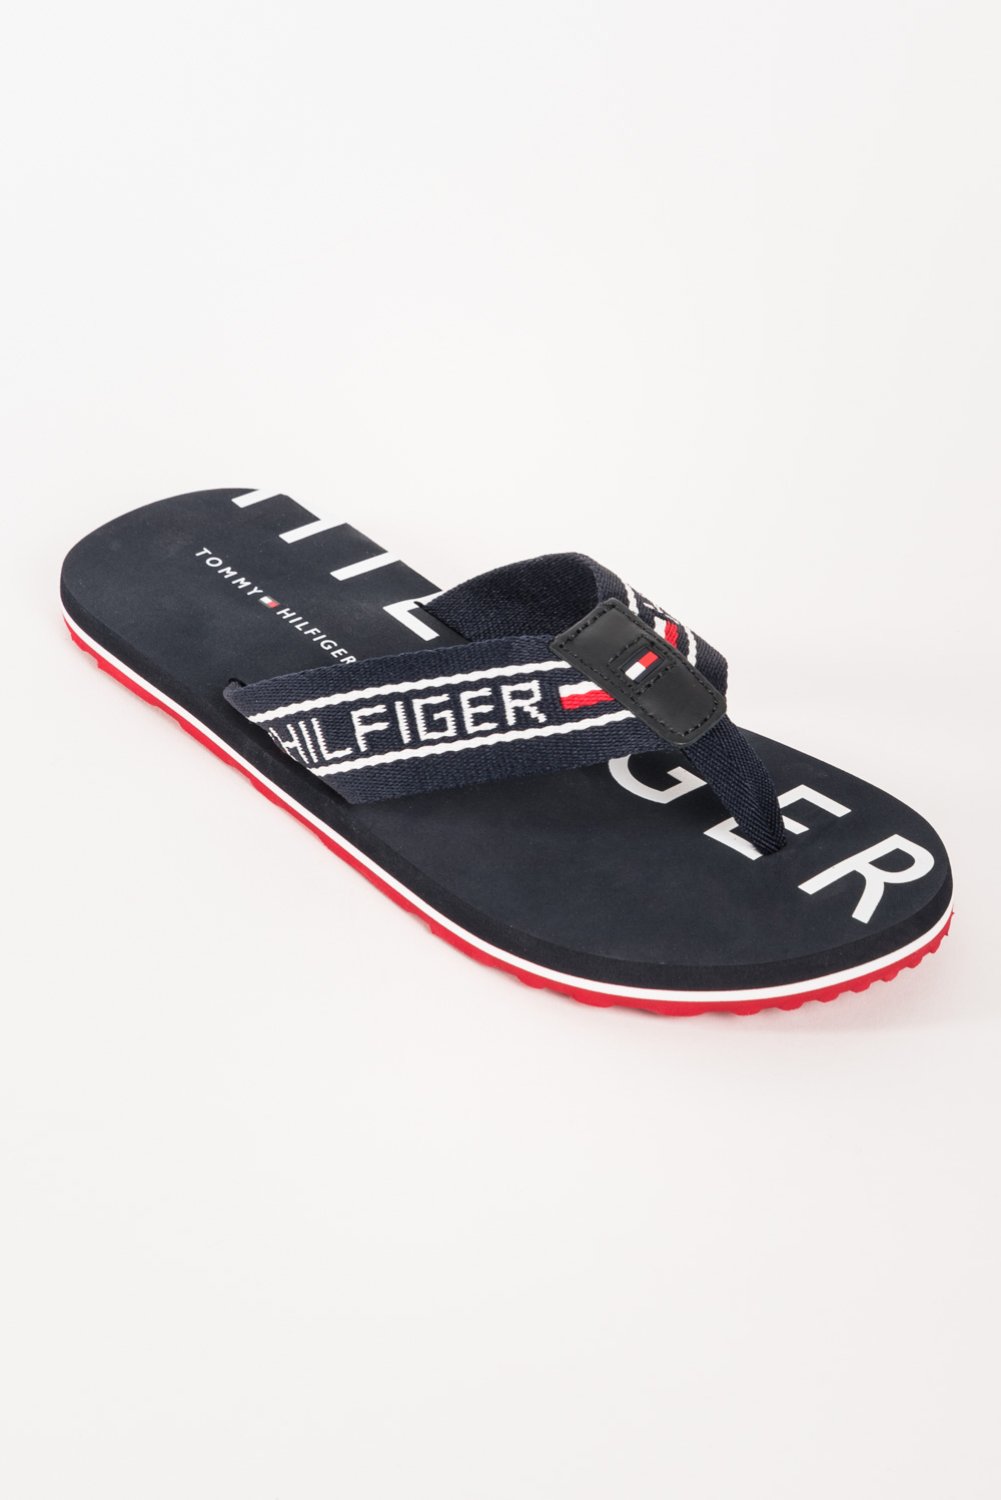 Tommy Hilfiger slippers - Griff Webshop